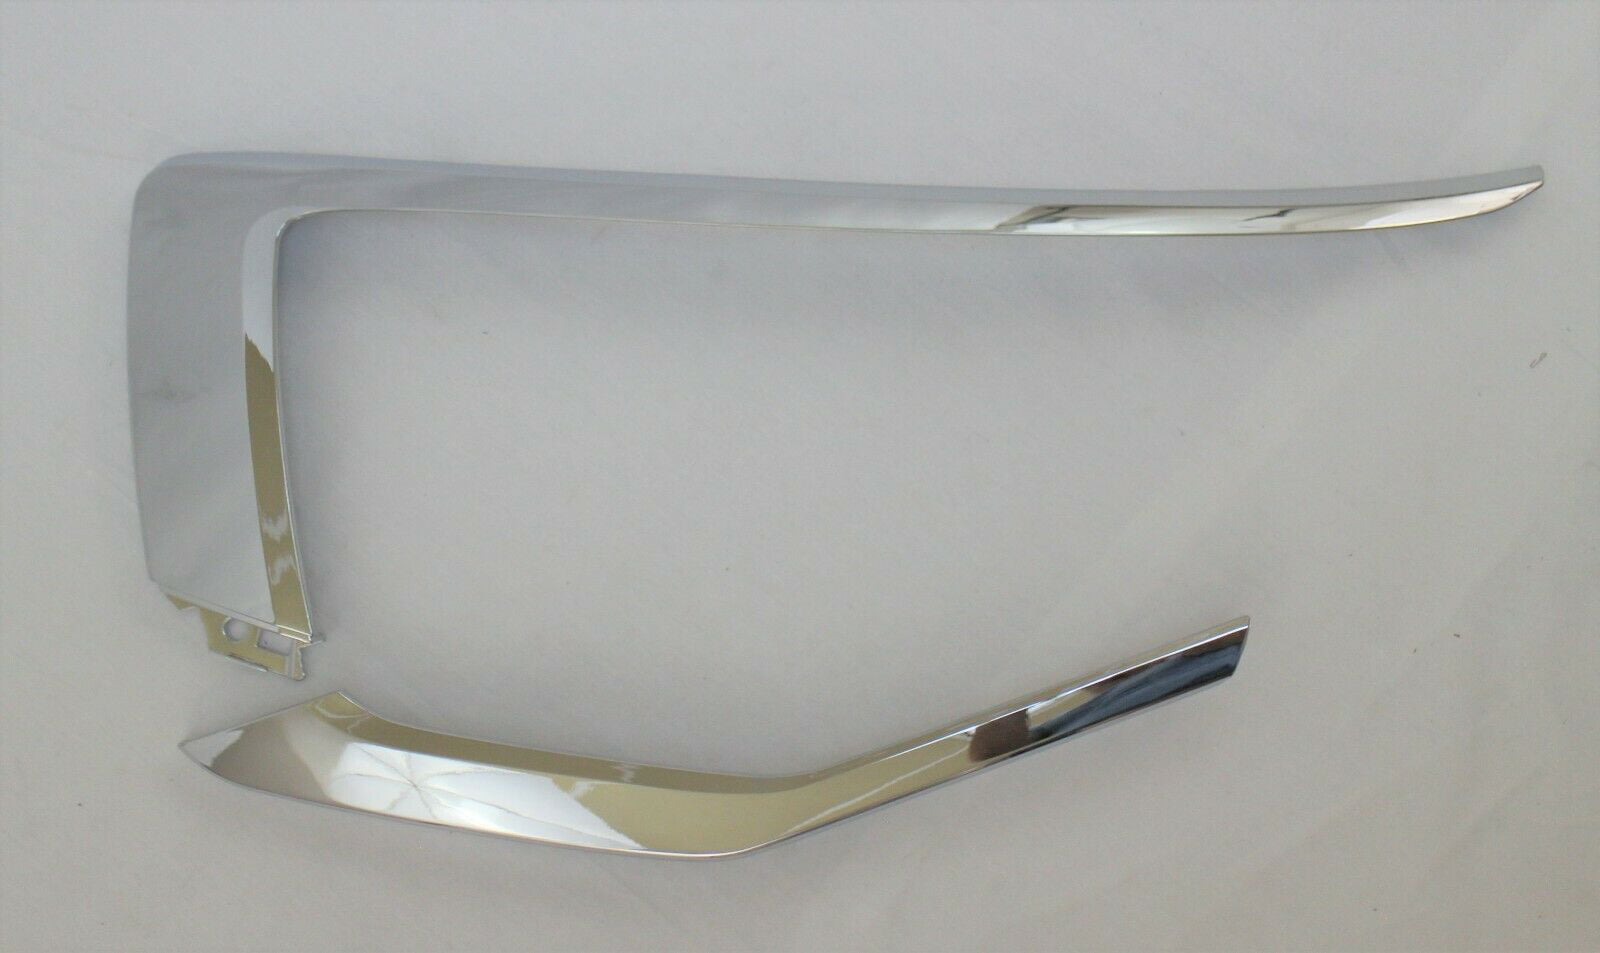 for 2018-21 Eclipse Cross front bumper cover LH chrome molding  insert set 2pc